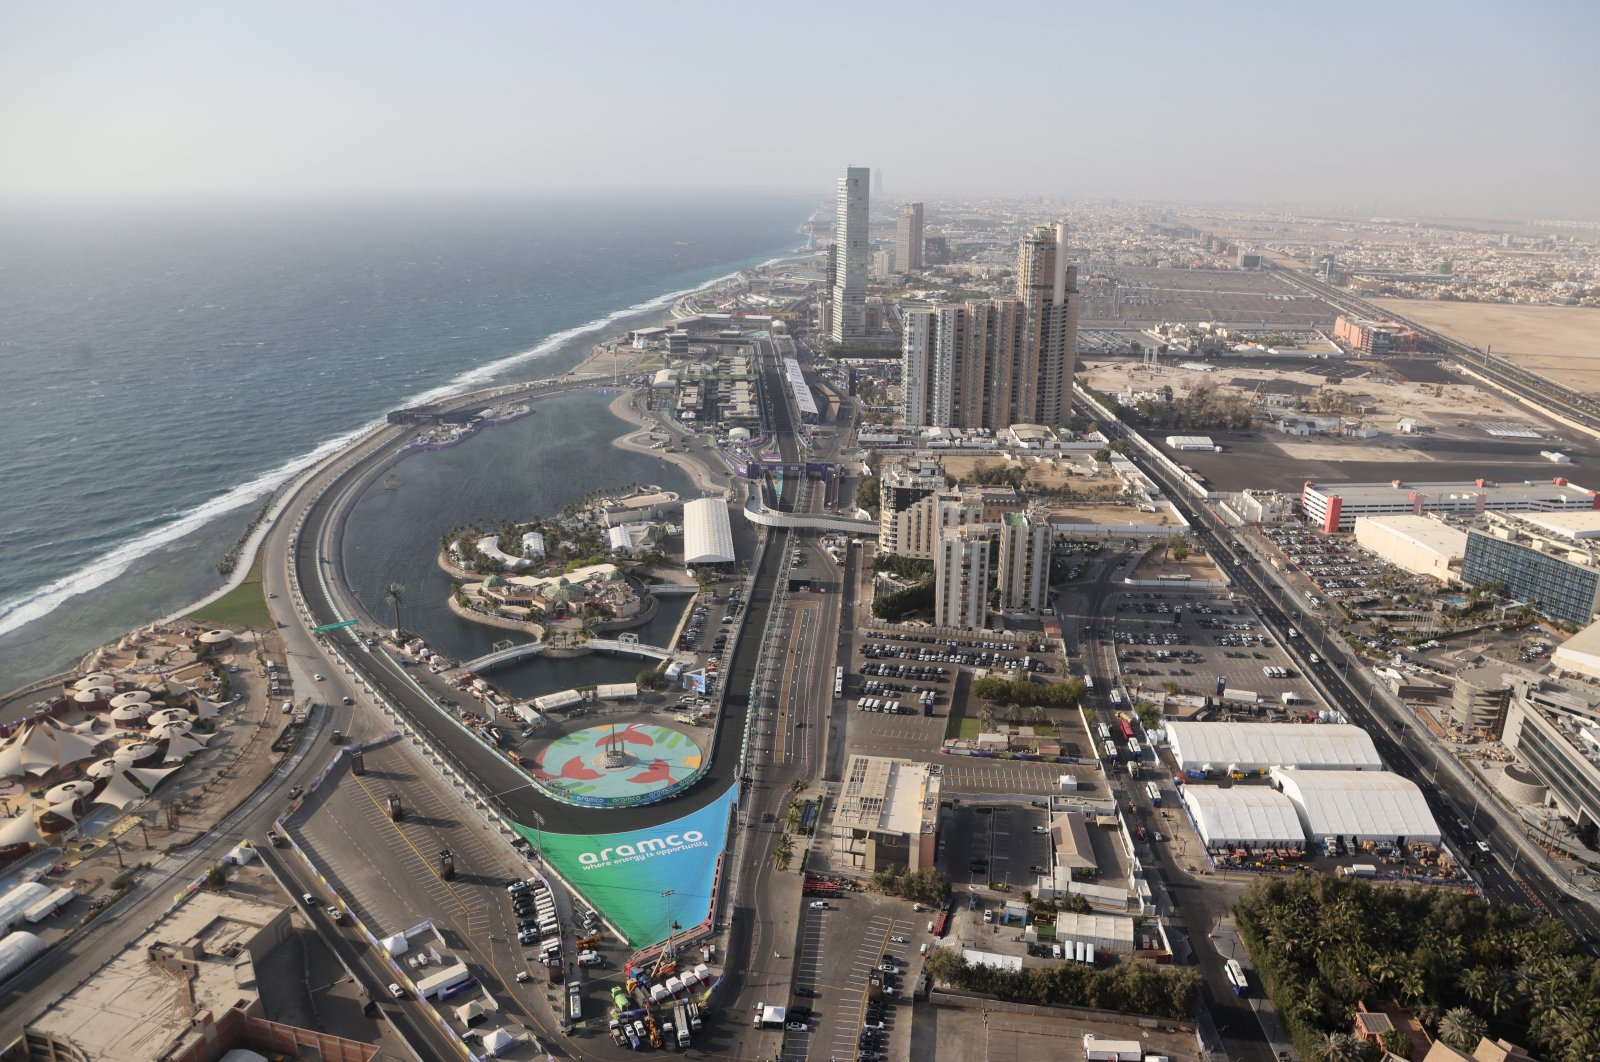 A general view of the Jiddah Corniche Circuit is seen during practice sessions for the Formula One Saudi Arabia Grand Prix, in Jeddah, Saudi Arabia, March 26, 2022. (Reuters Photo)